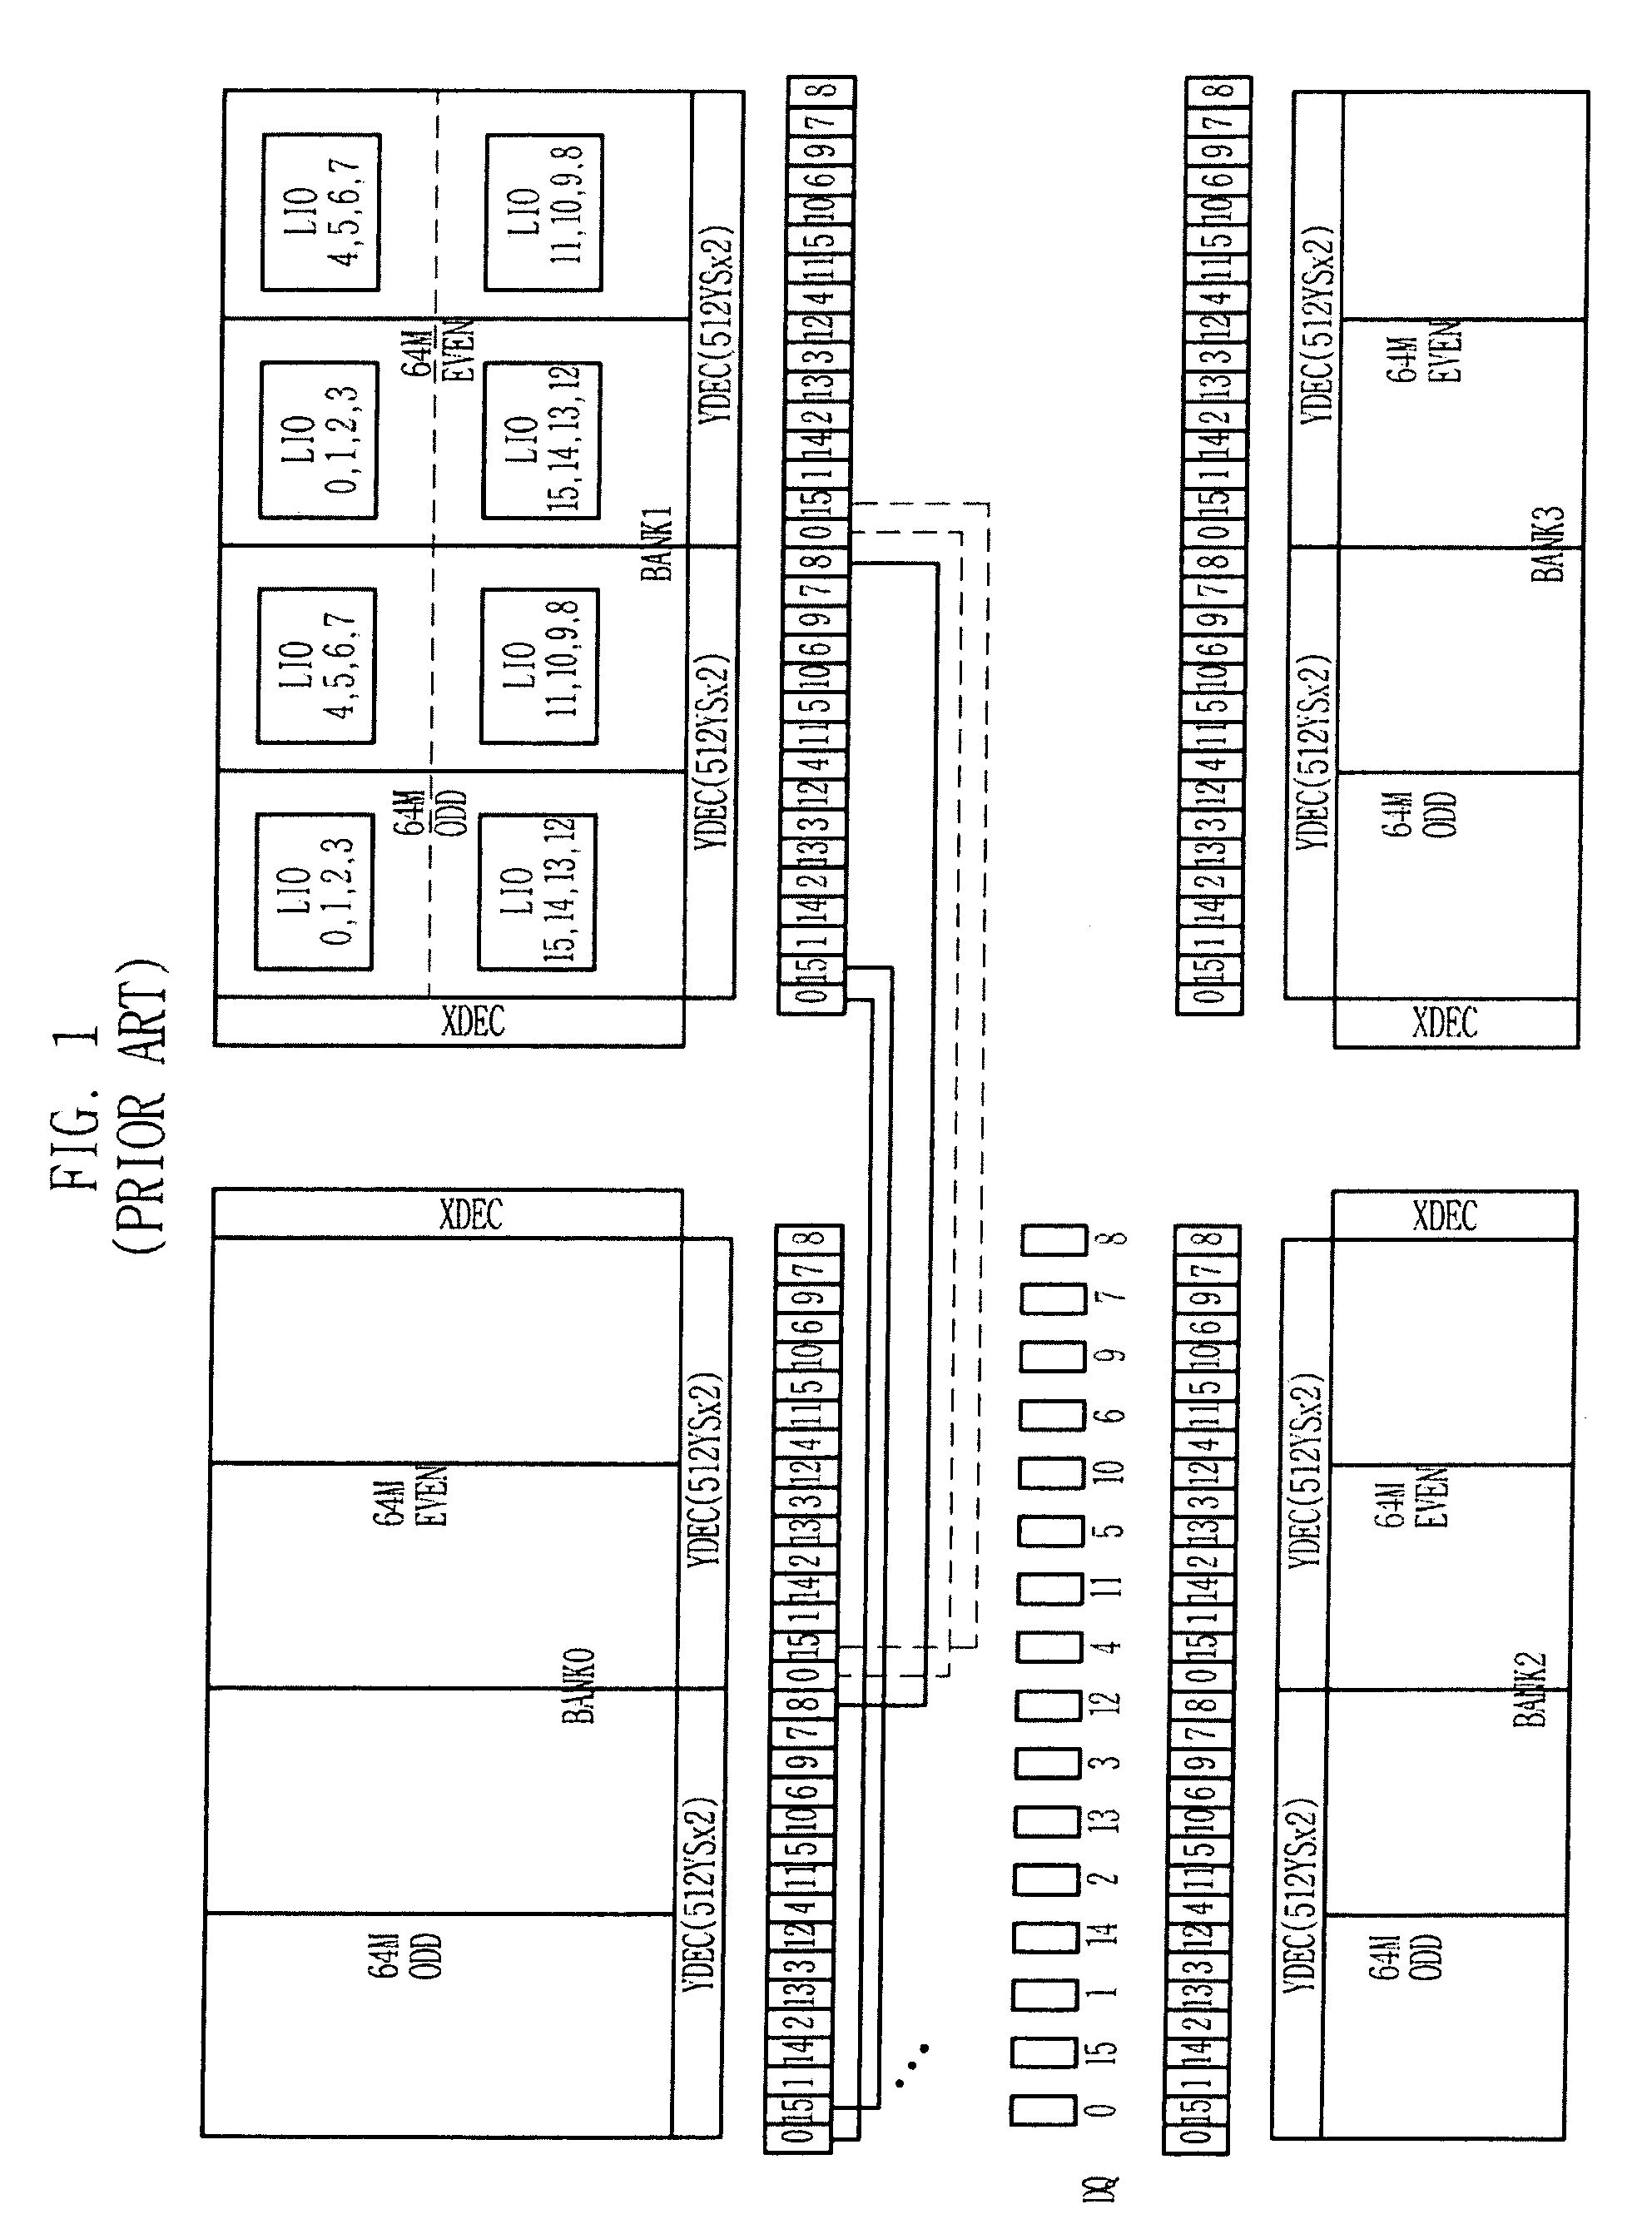 Semiconductor memory device having a global data bus